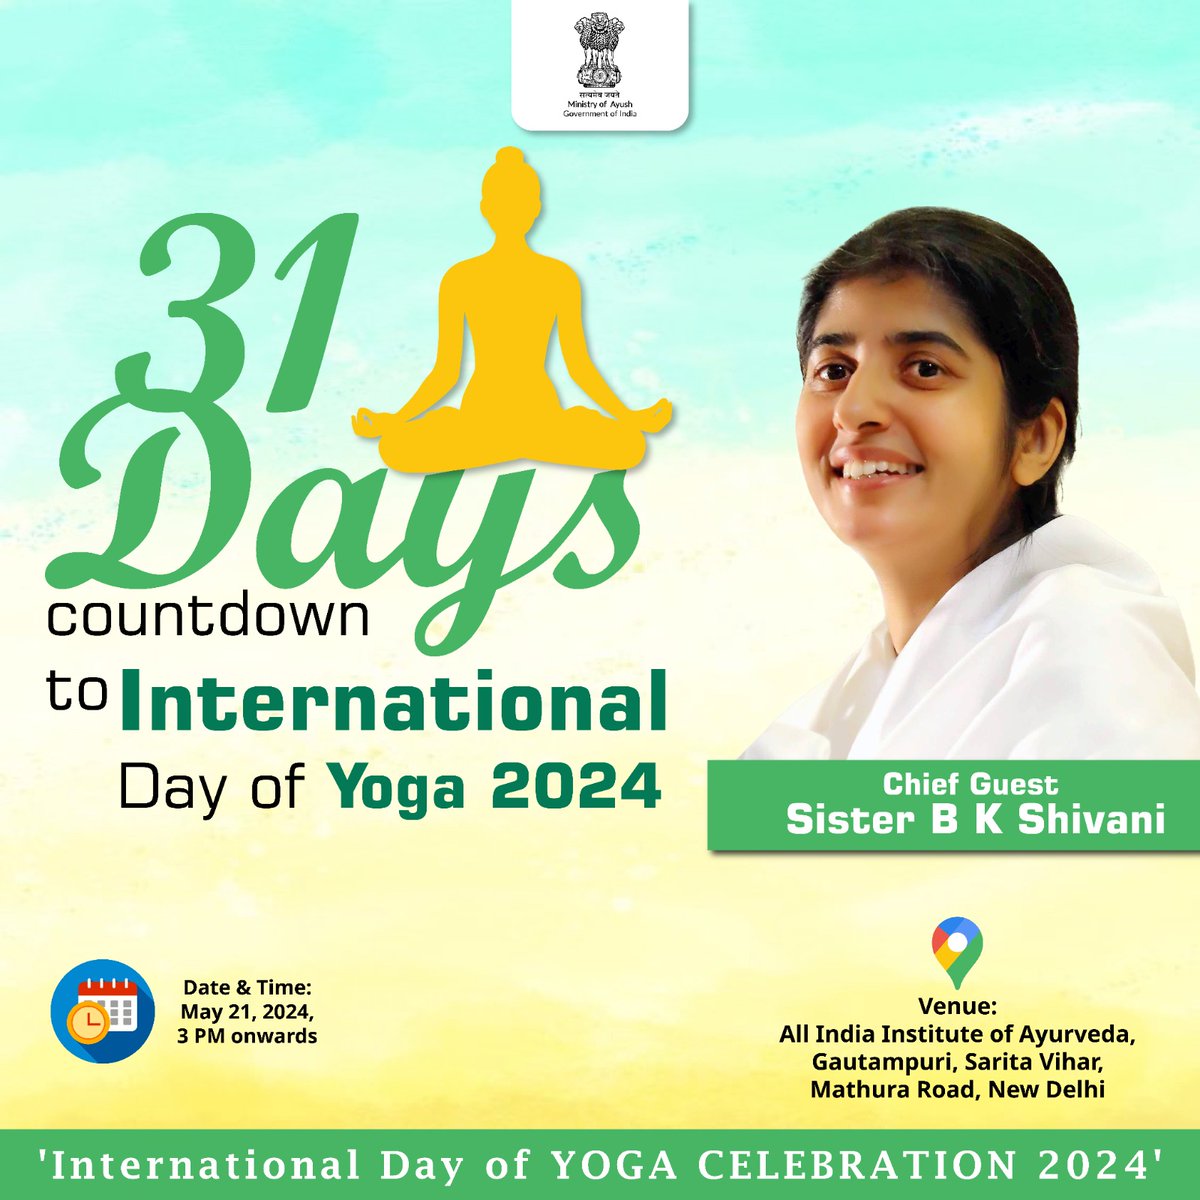 To celebrate the 31-days countdown to the 10th International Day of Yoga, the All India Institute of Ayurveda (AIIA), New Delhi, is organizing a grand event themed 'Yoga for Women Empowerment'. #IDY2024 #YogaDay2024 #InternationalDayOfYoga2024 #YogaDay